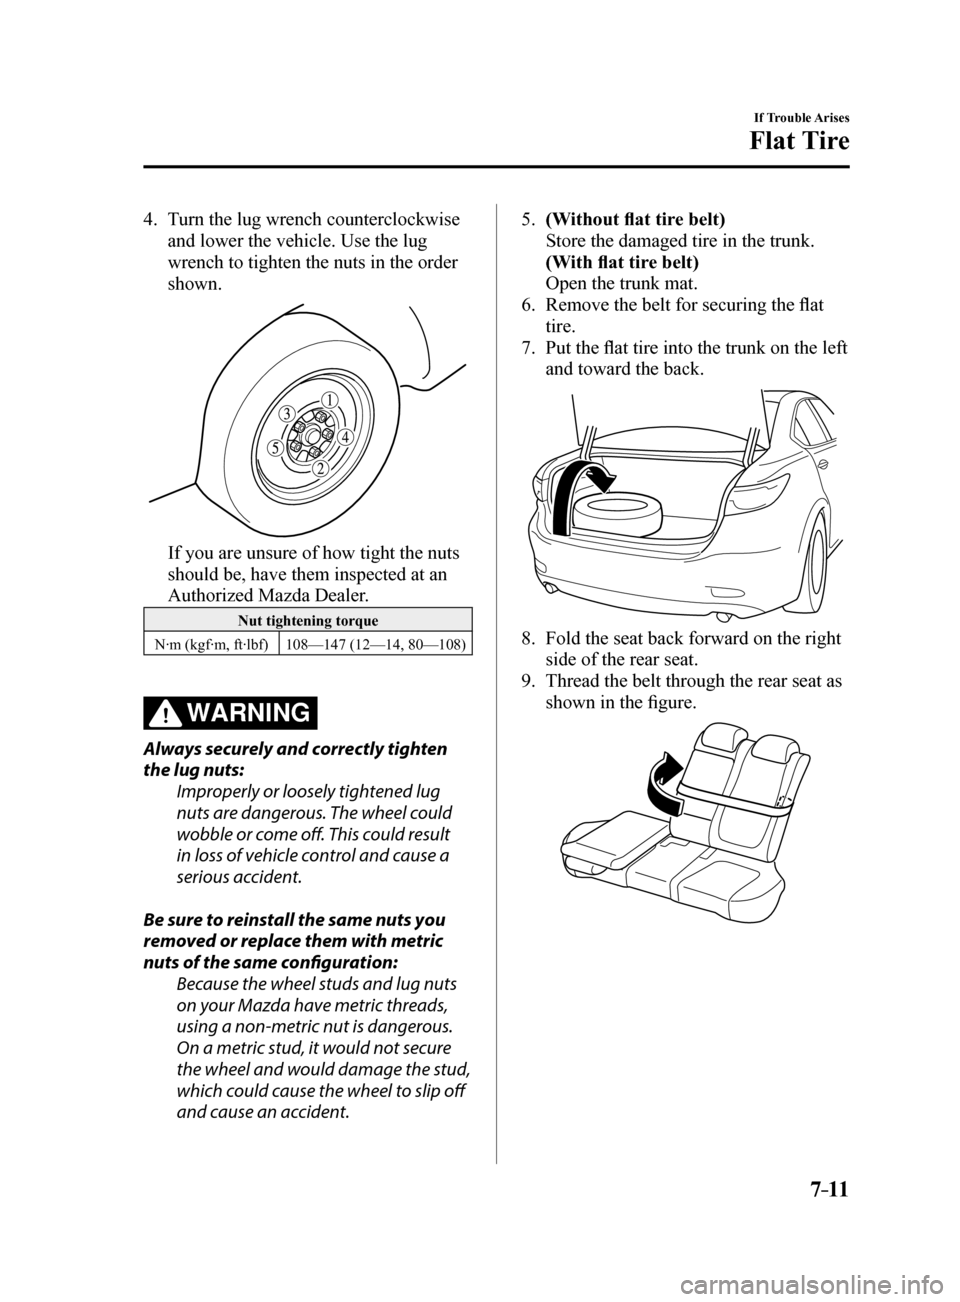 MAZDA MODEL 6 2017  Owners Manual (in English) 7–11
If Trouble Arises
Flat Tire
4. Turn the lug wrench counterclockwise 
and lower the vehicle. Use the lug 
wrench to tighten the nuts in the order 
shown.
 If you are unsure of how tight the nuts